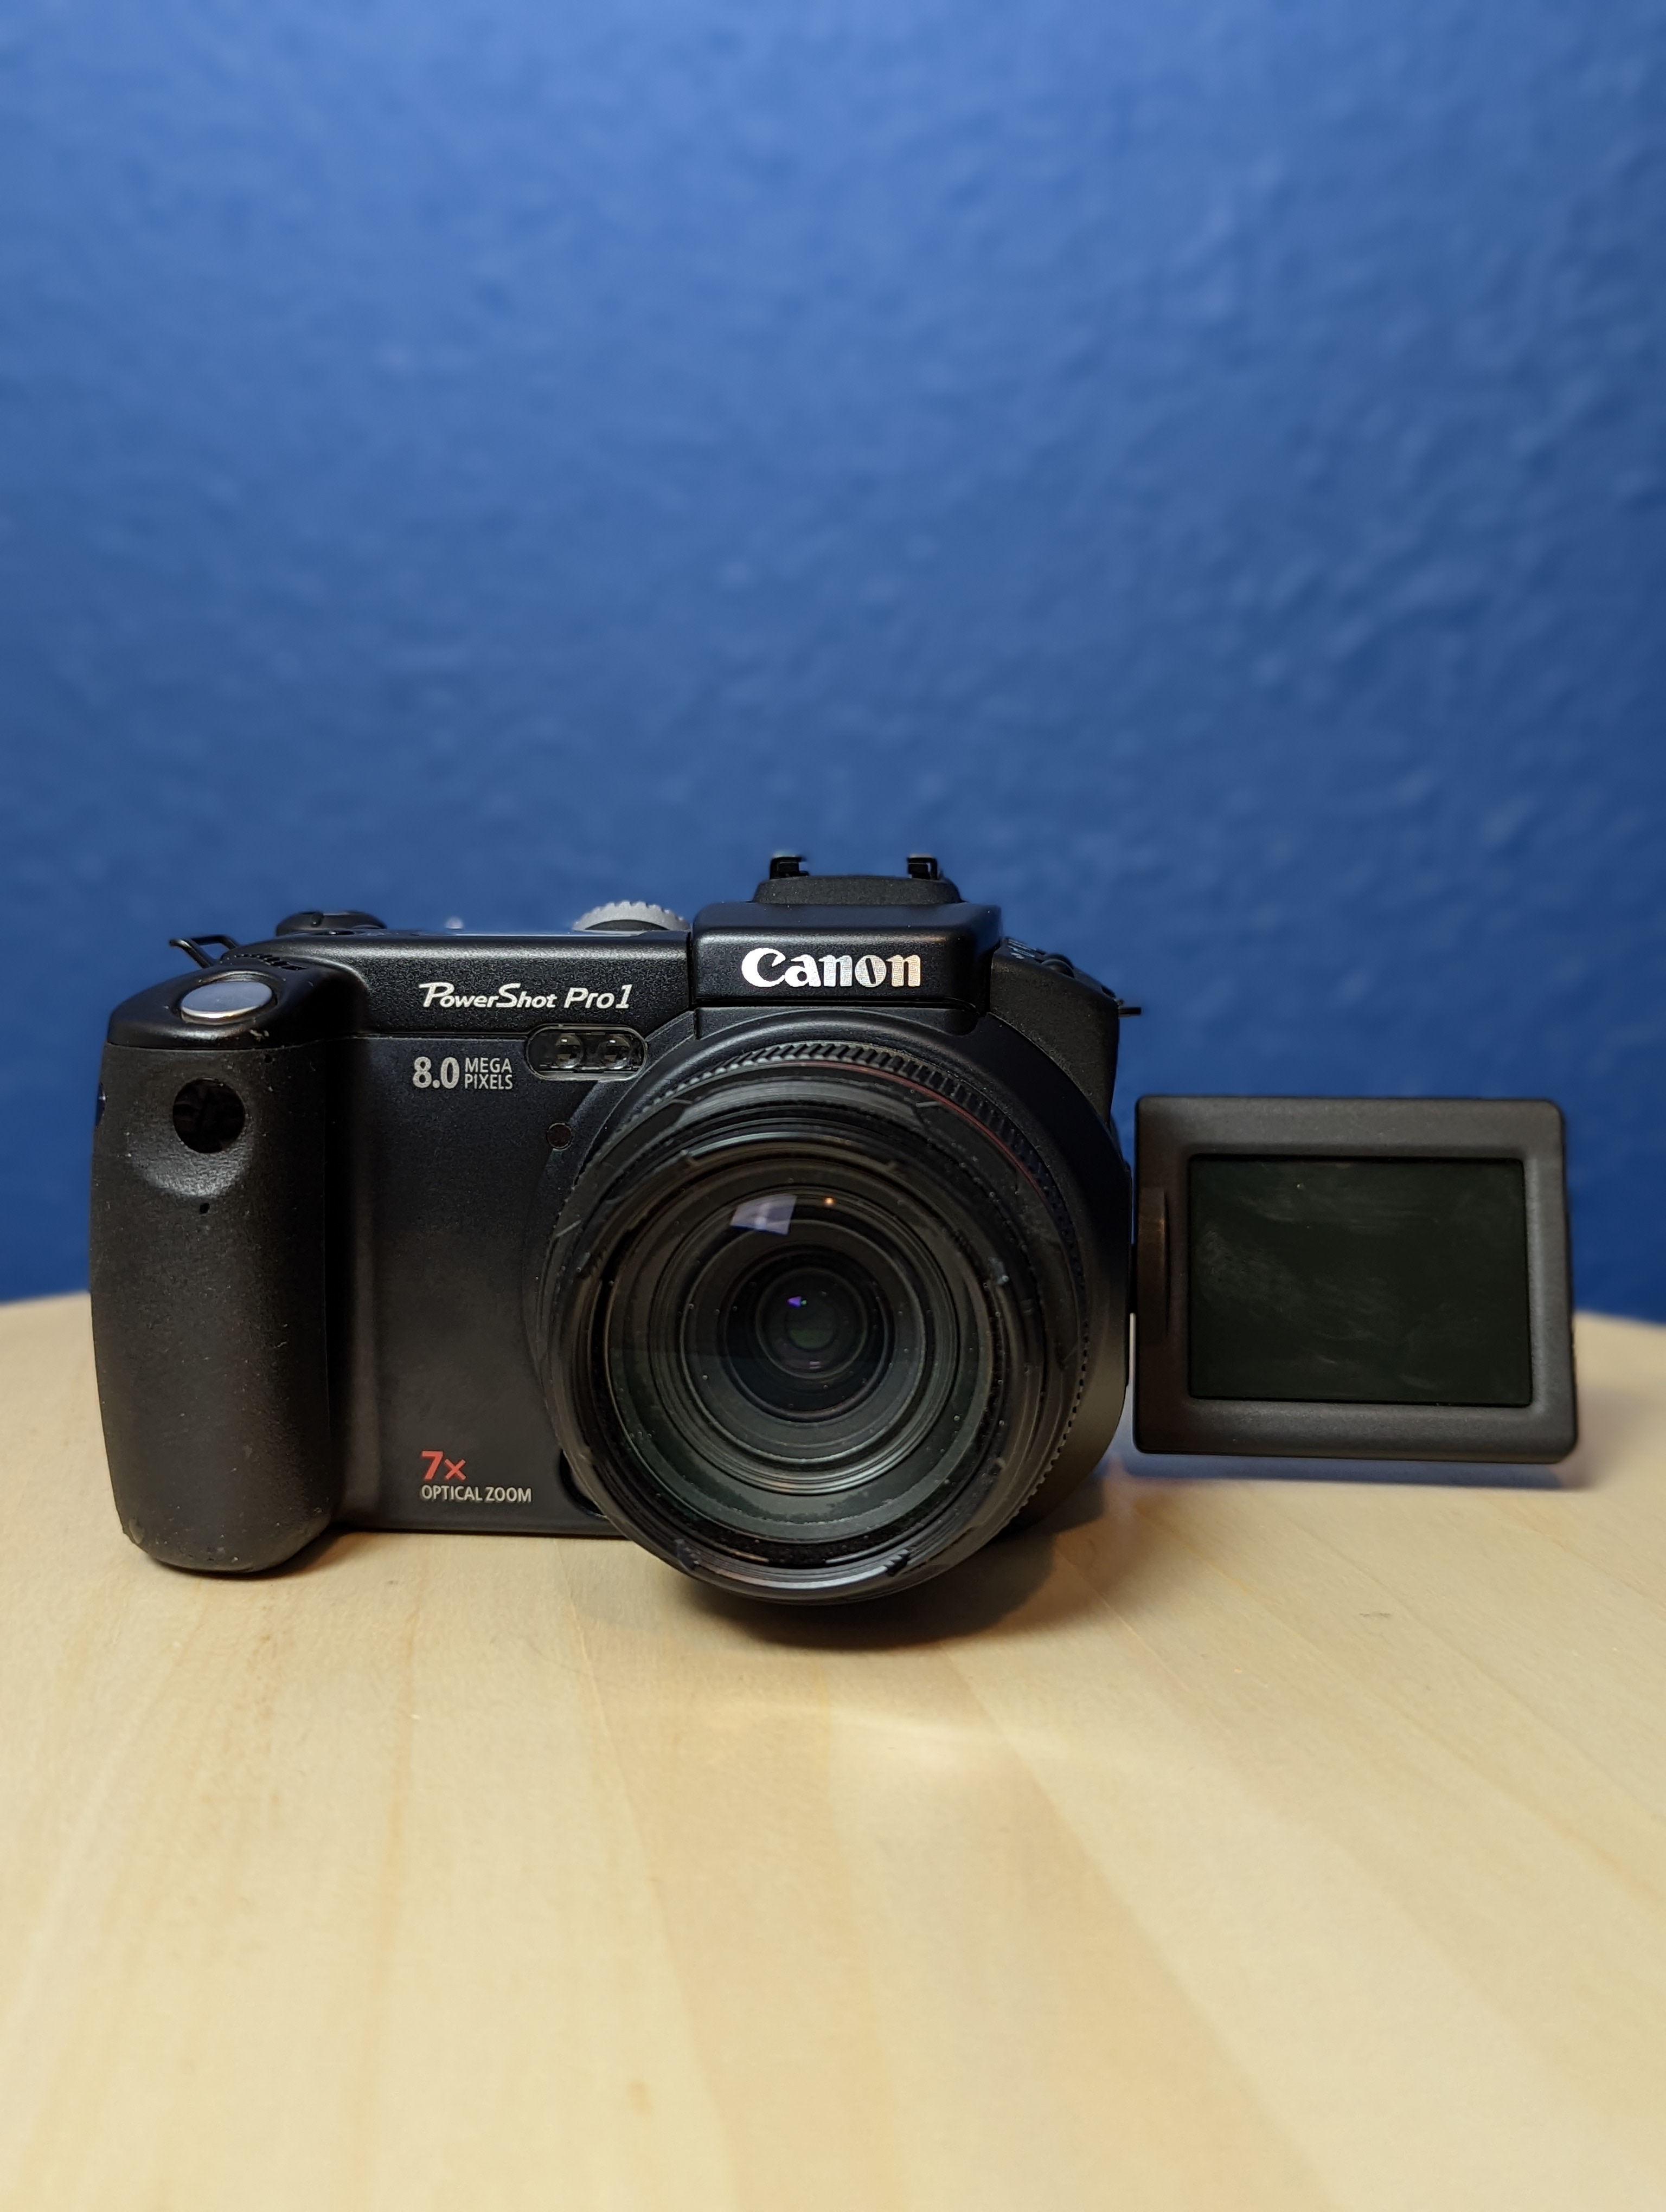 Canon PowerShot Pro1 with screen in flip forward position